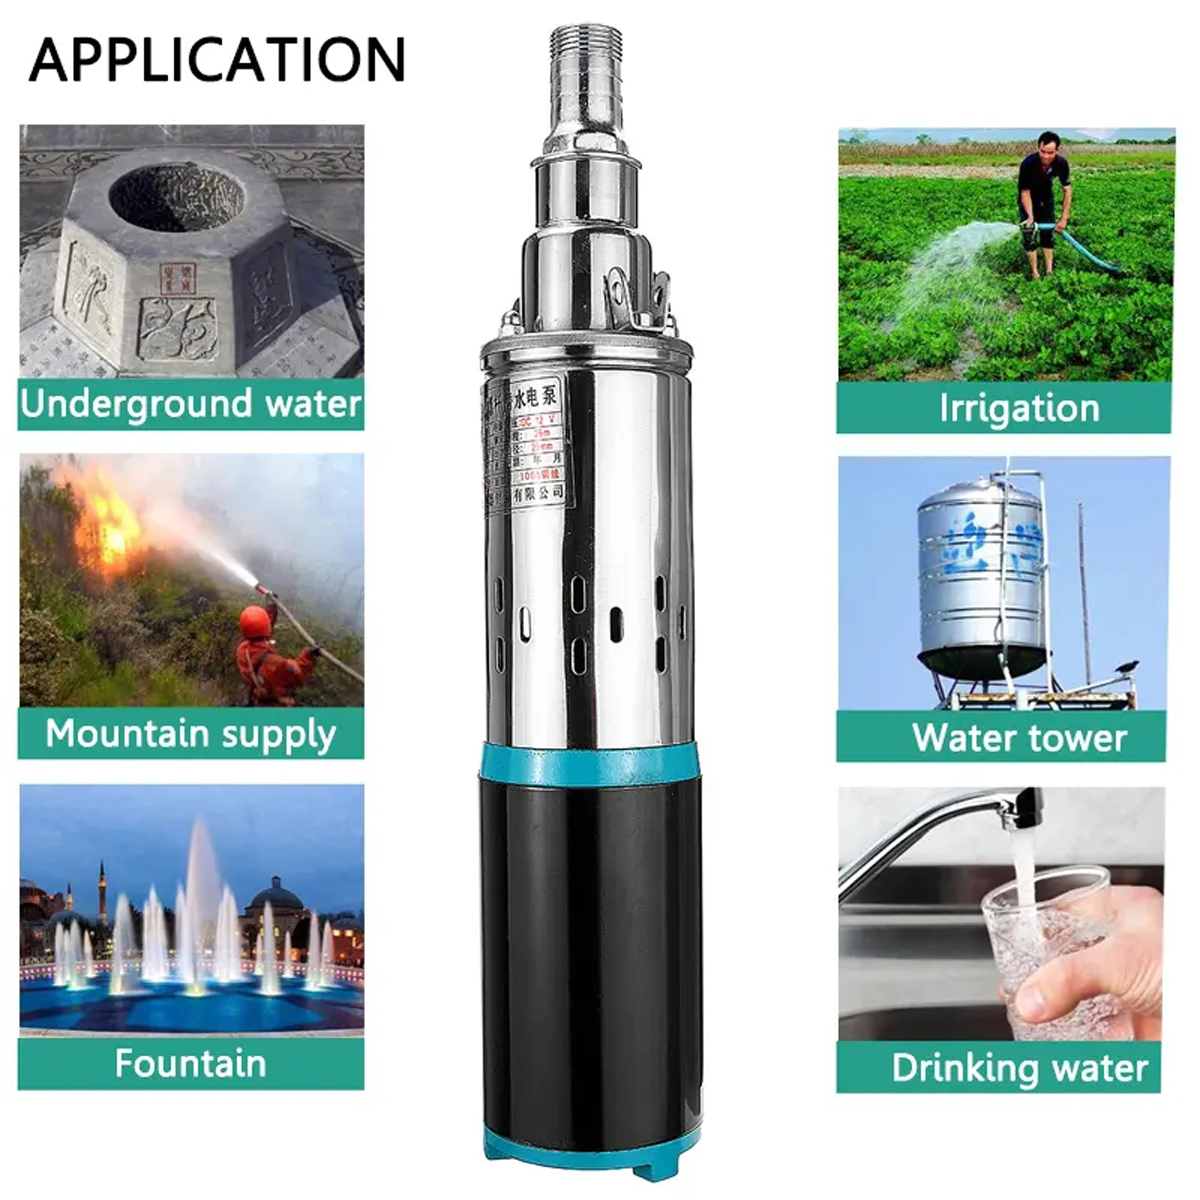 DC-12V24V-3msup3h-200W-Peak-Solar-Submersible-Pump-Stainless-Steel-Deep-Well-Water-Pump-1790200-2